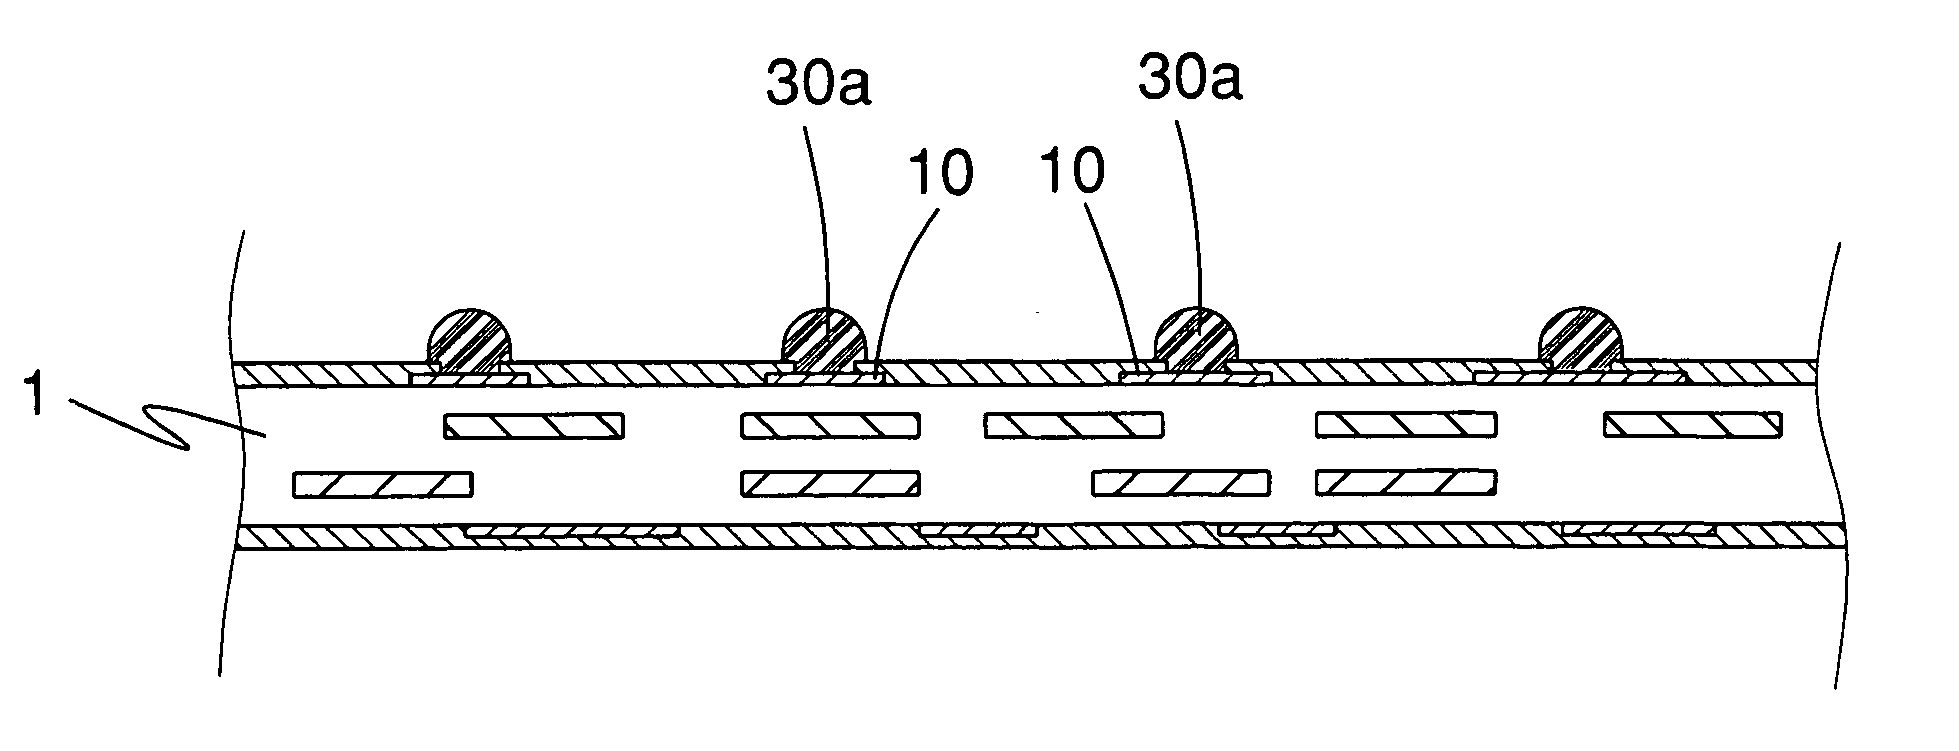 Method for forming heightened solder bumps on circuit boards